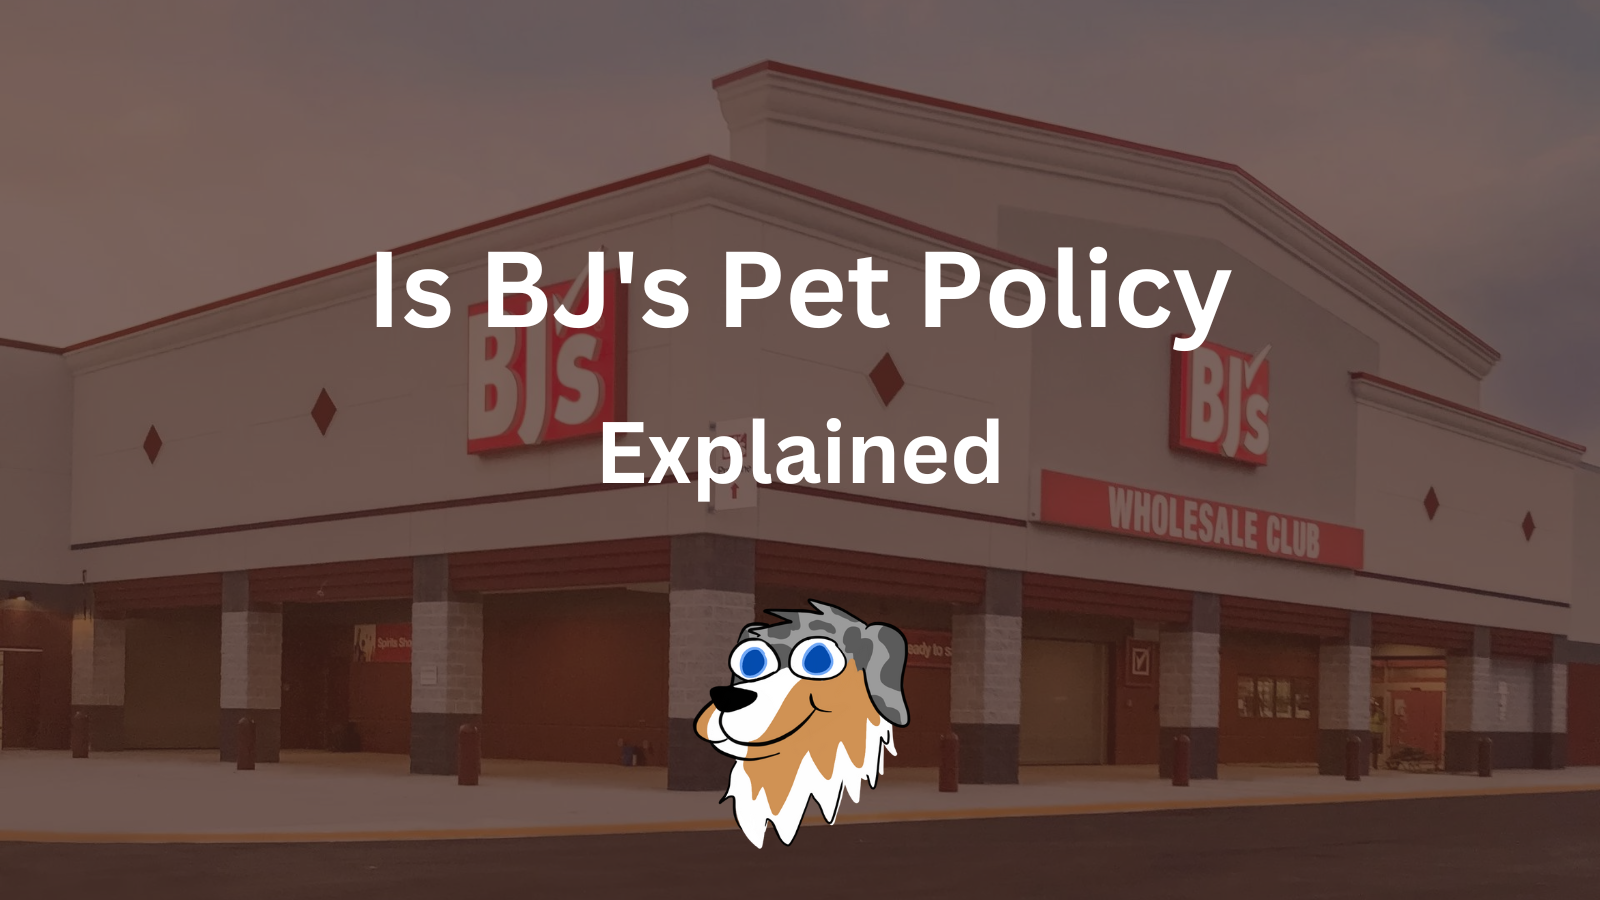 Image Text: "BJ's Pet Policy Explained"